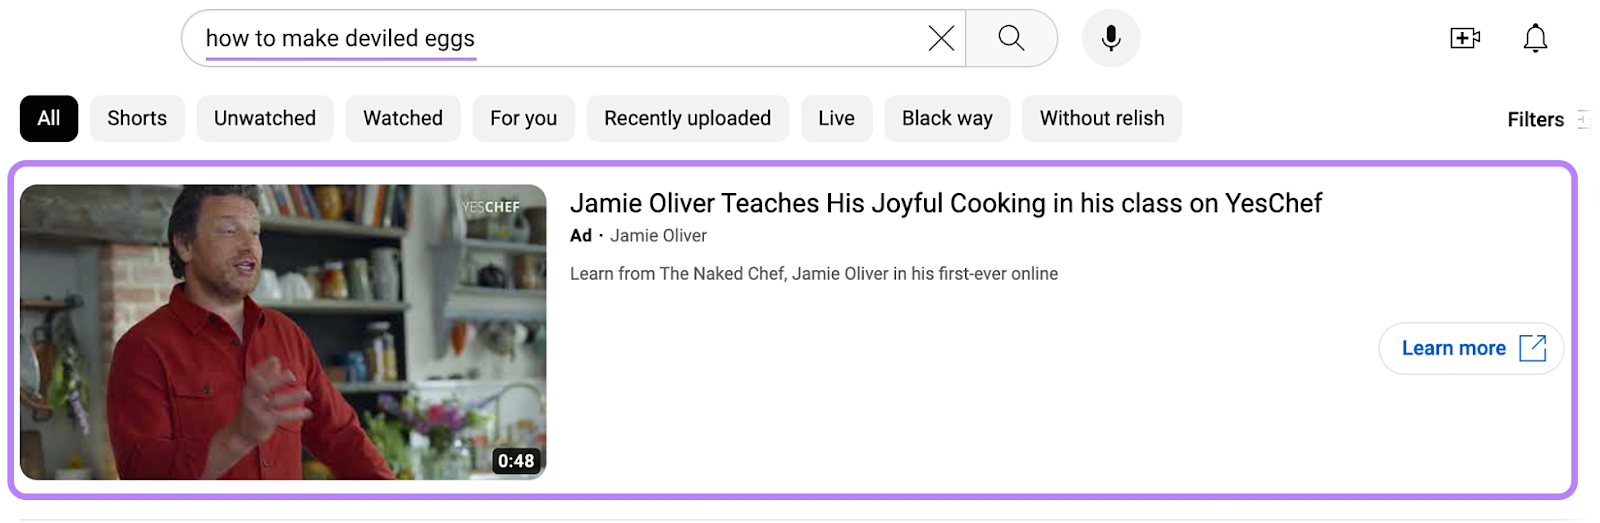 Jamie Oliver's cooking ad for "how to make deviled eggs" search on YouTube